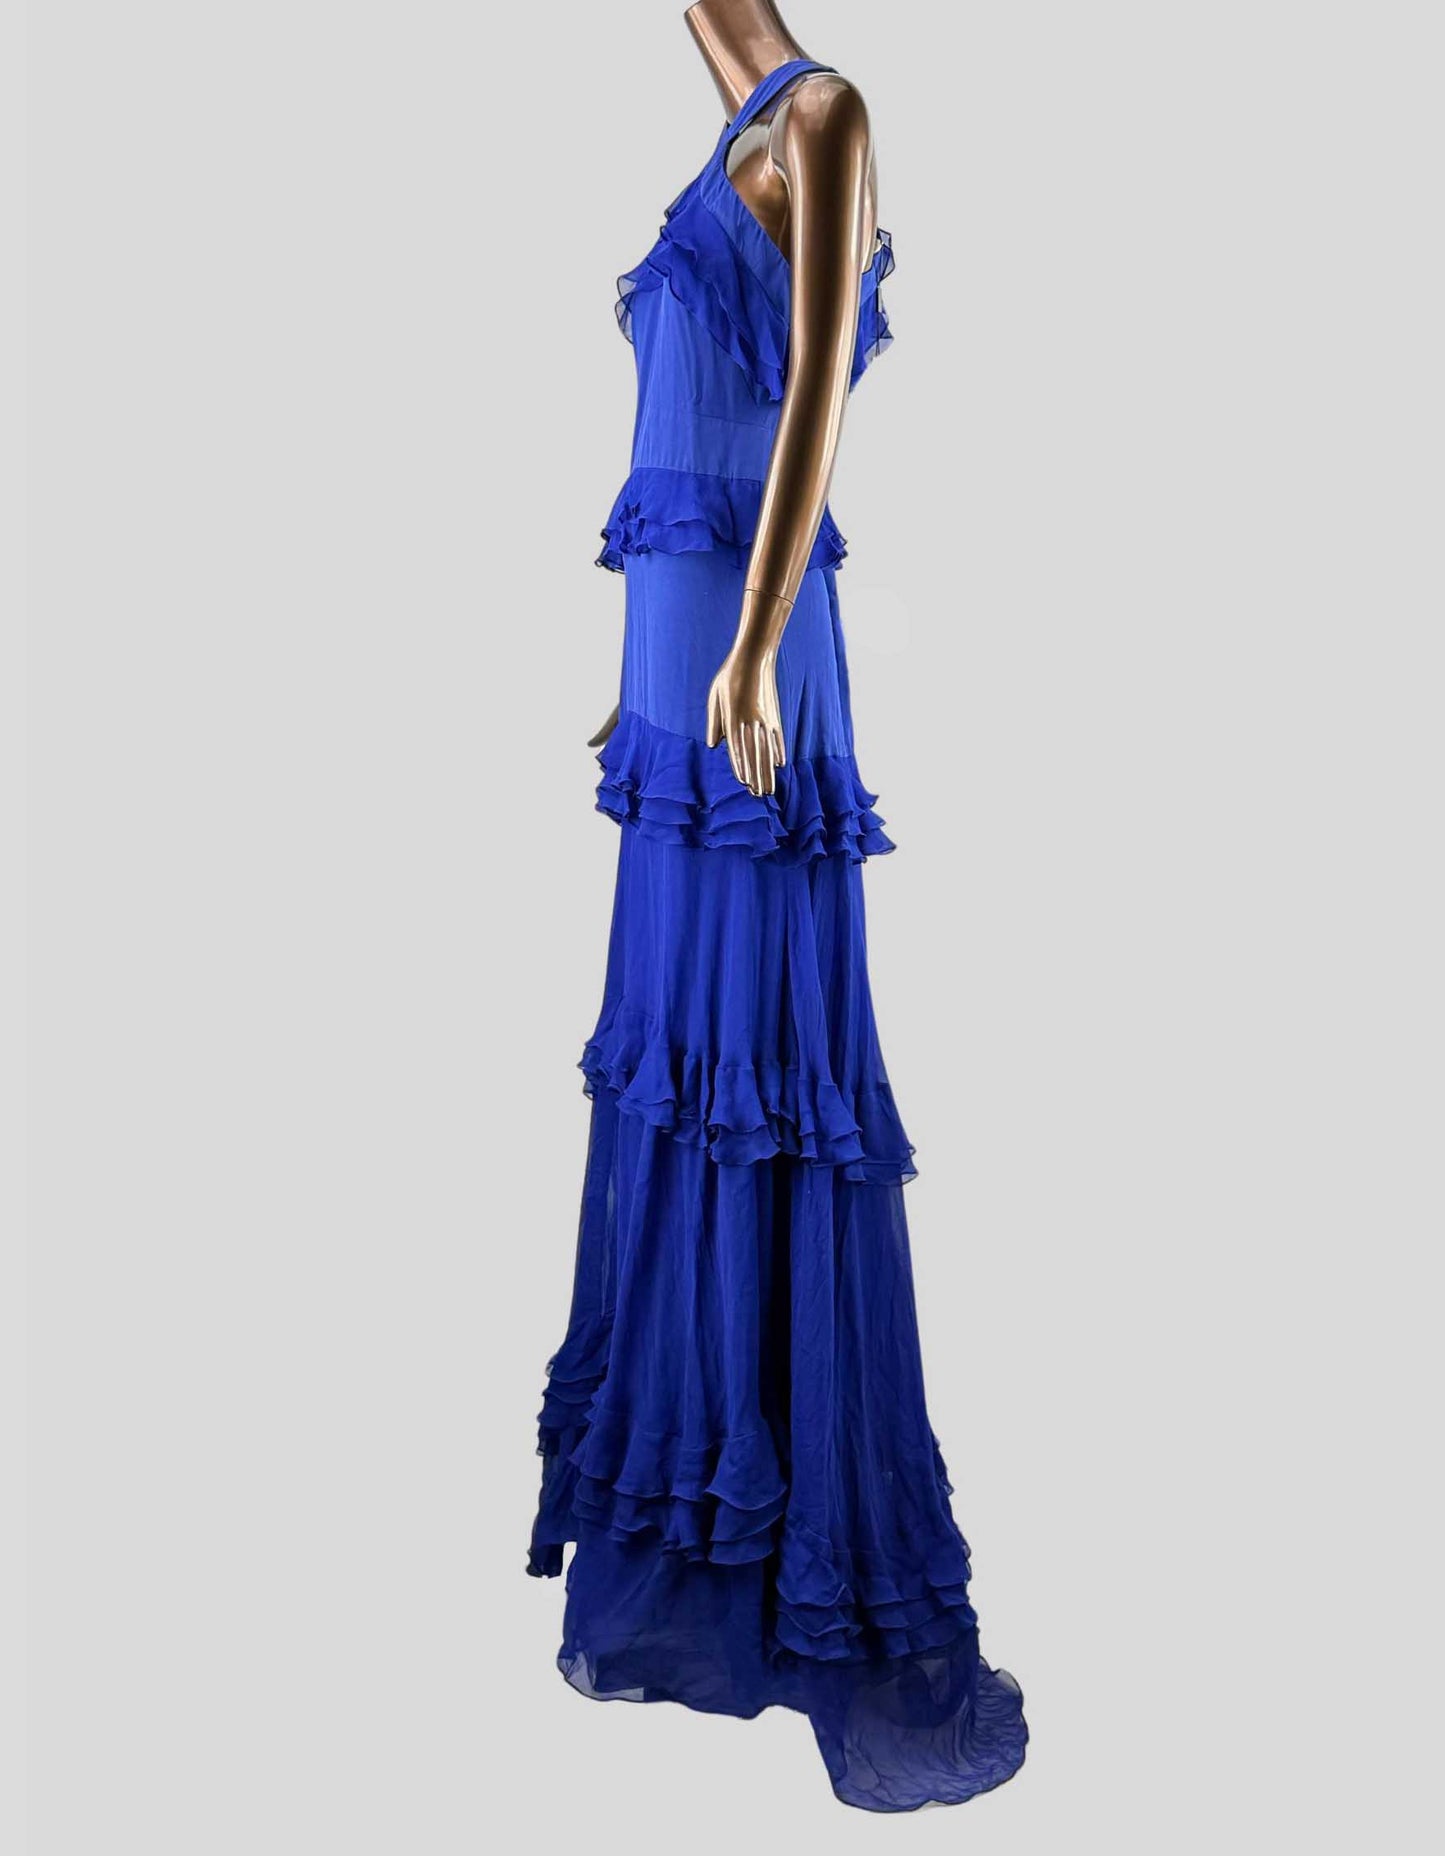 PRABAL GURUNG Sleeveless Halter Tiered Gown w/ Tags - 8 US